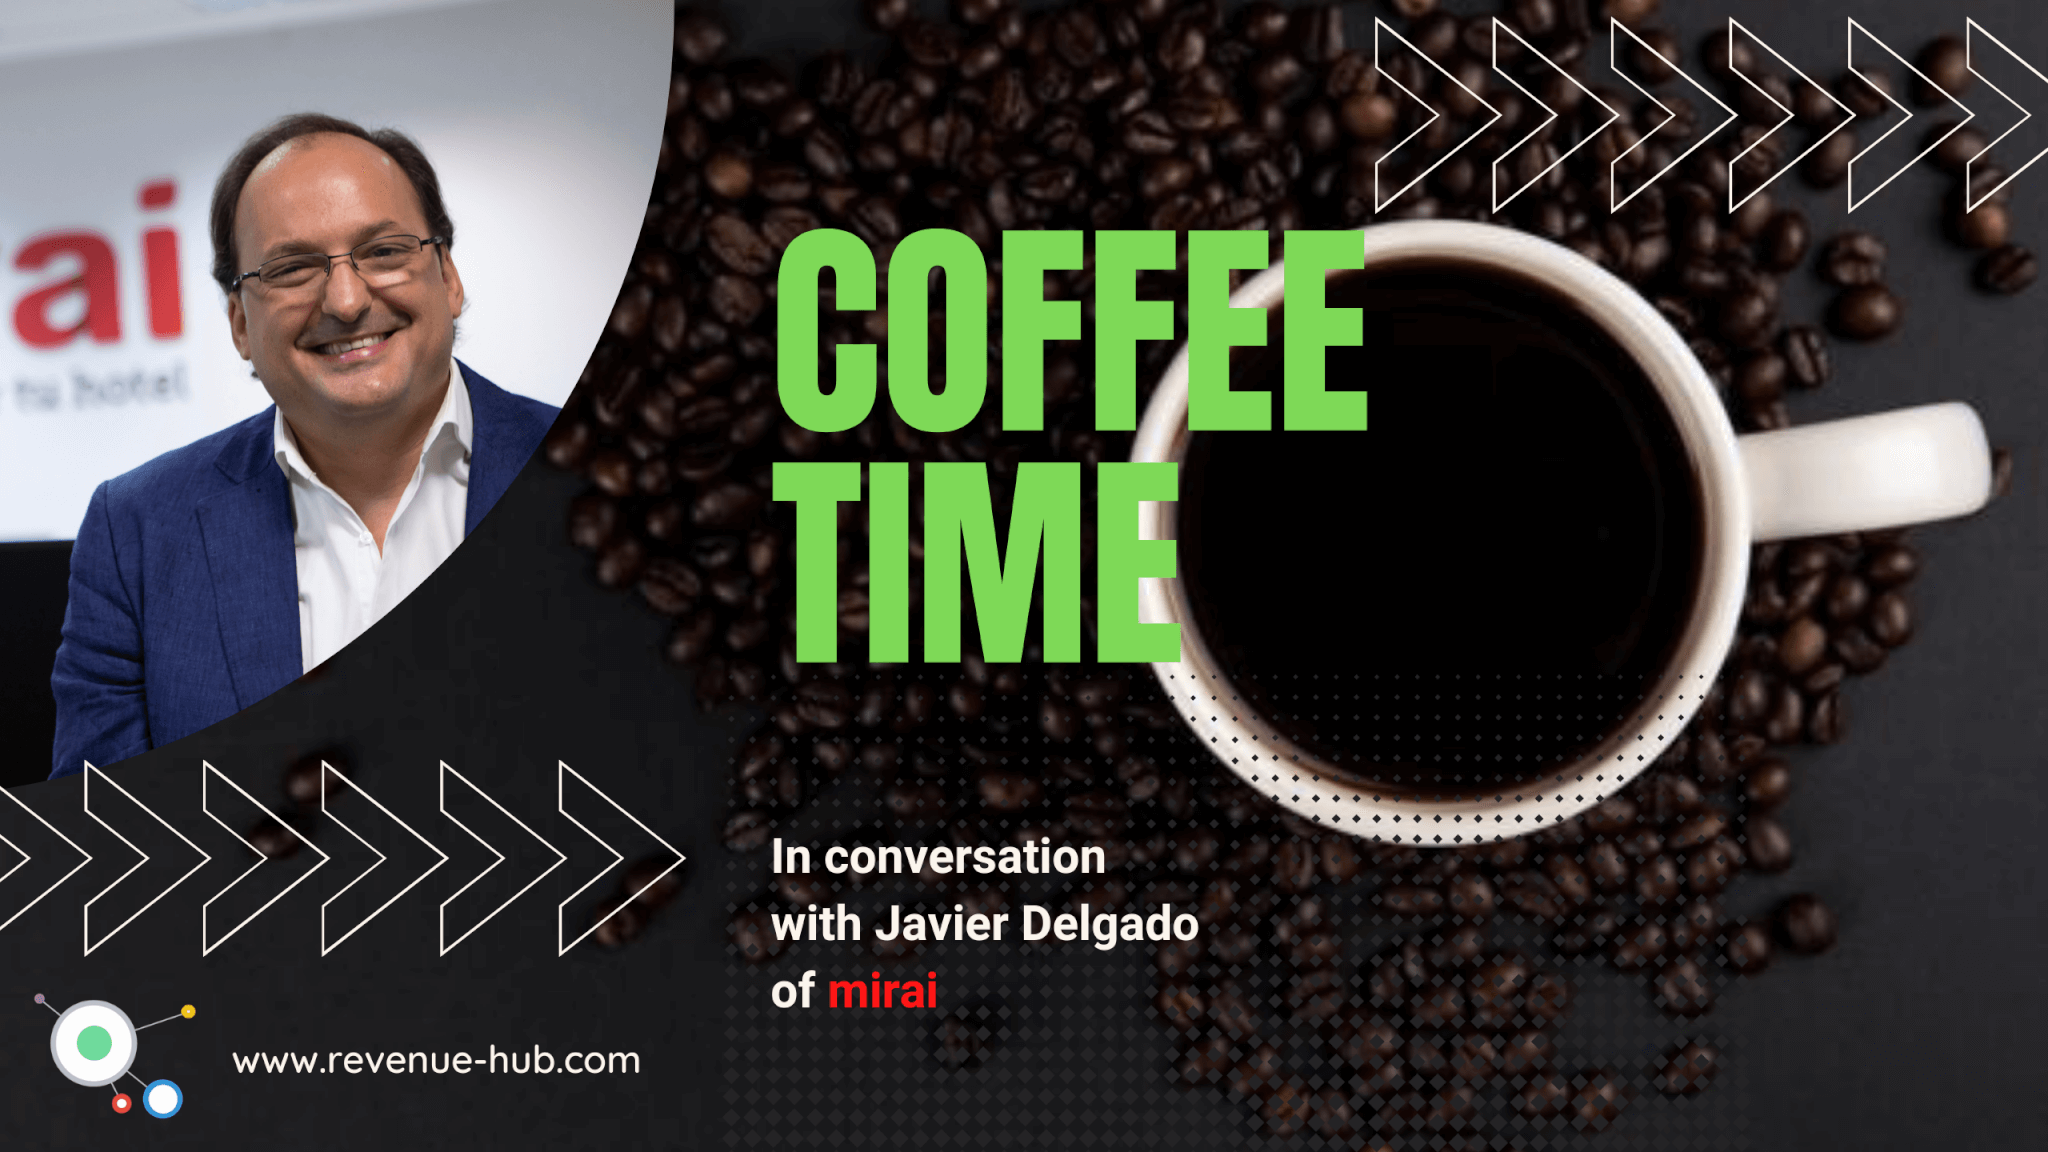 video thumbnail of coffee time chat with javier delgado of mirai about the need for hotels to evolve fast or suffer in the future